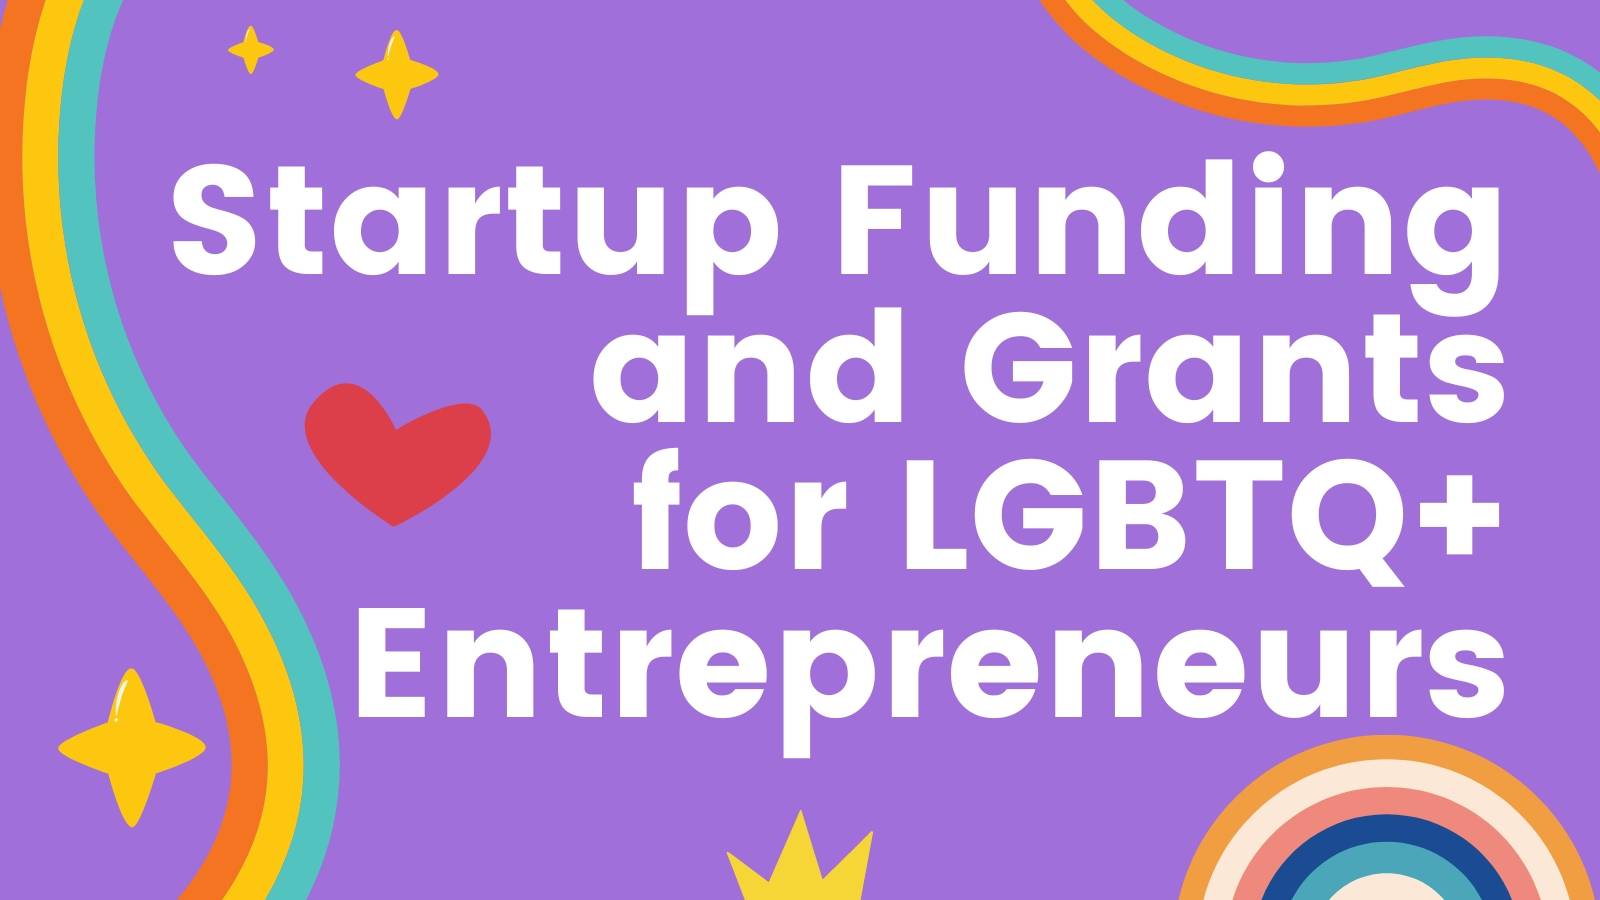 Startup Funding and Grants for LGBTQ+ Entrepreneurs: What It Is and How to Get Capital for a Business